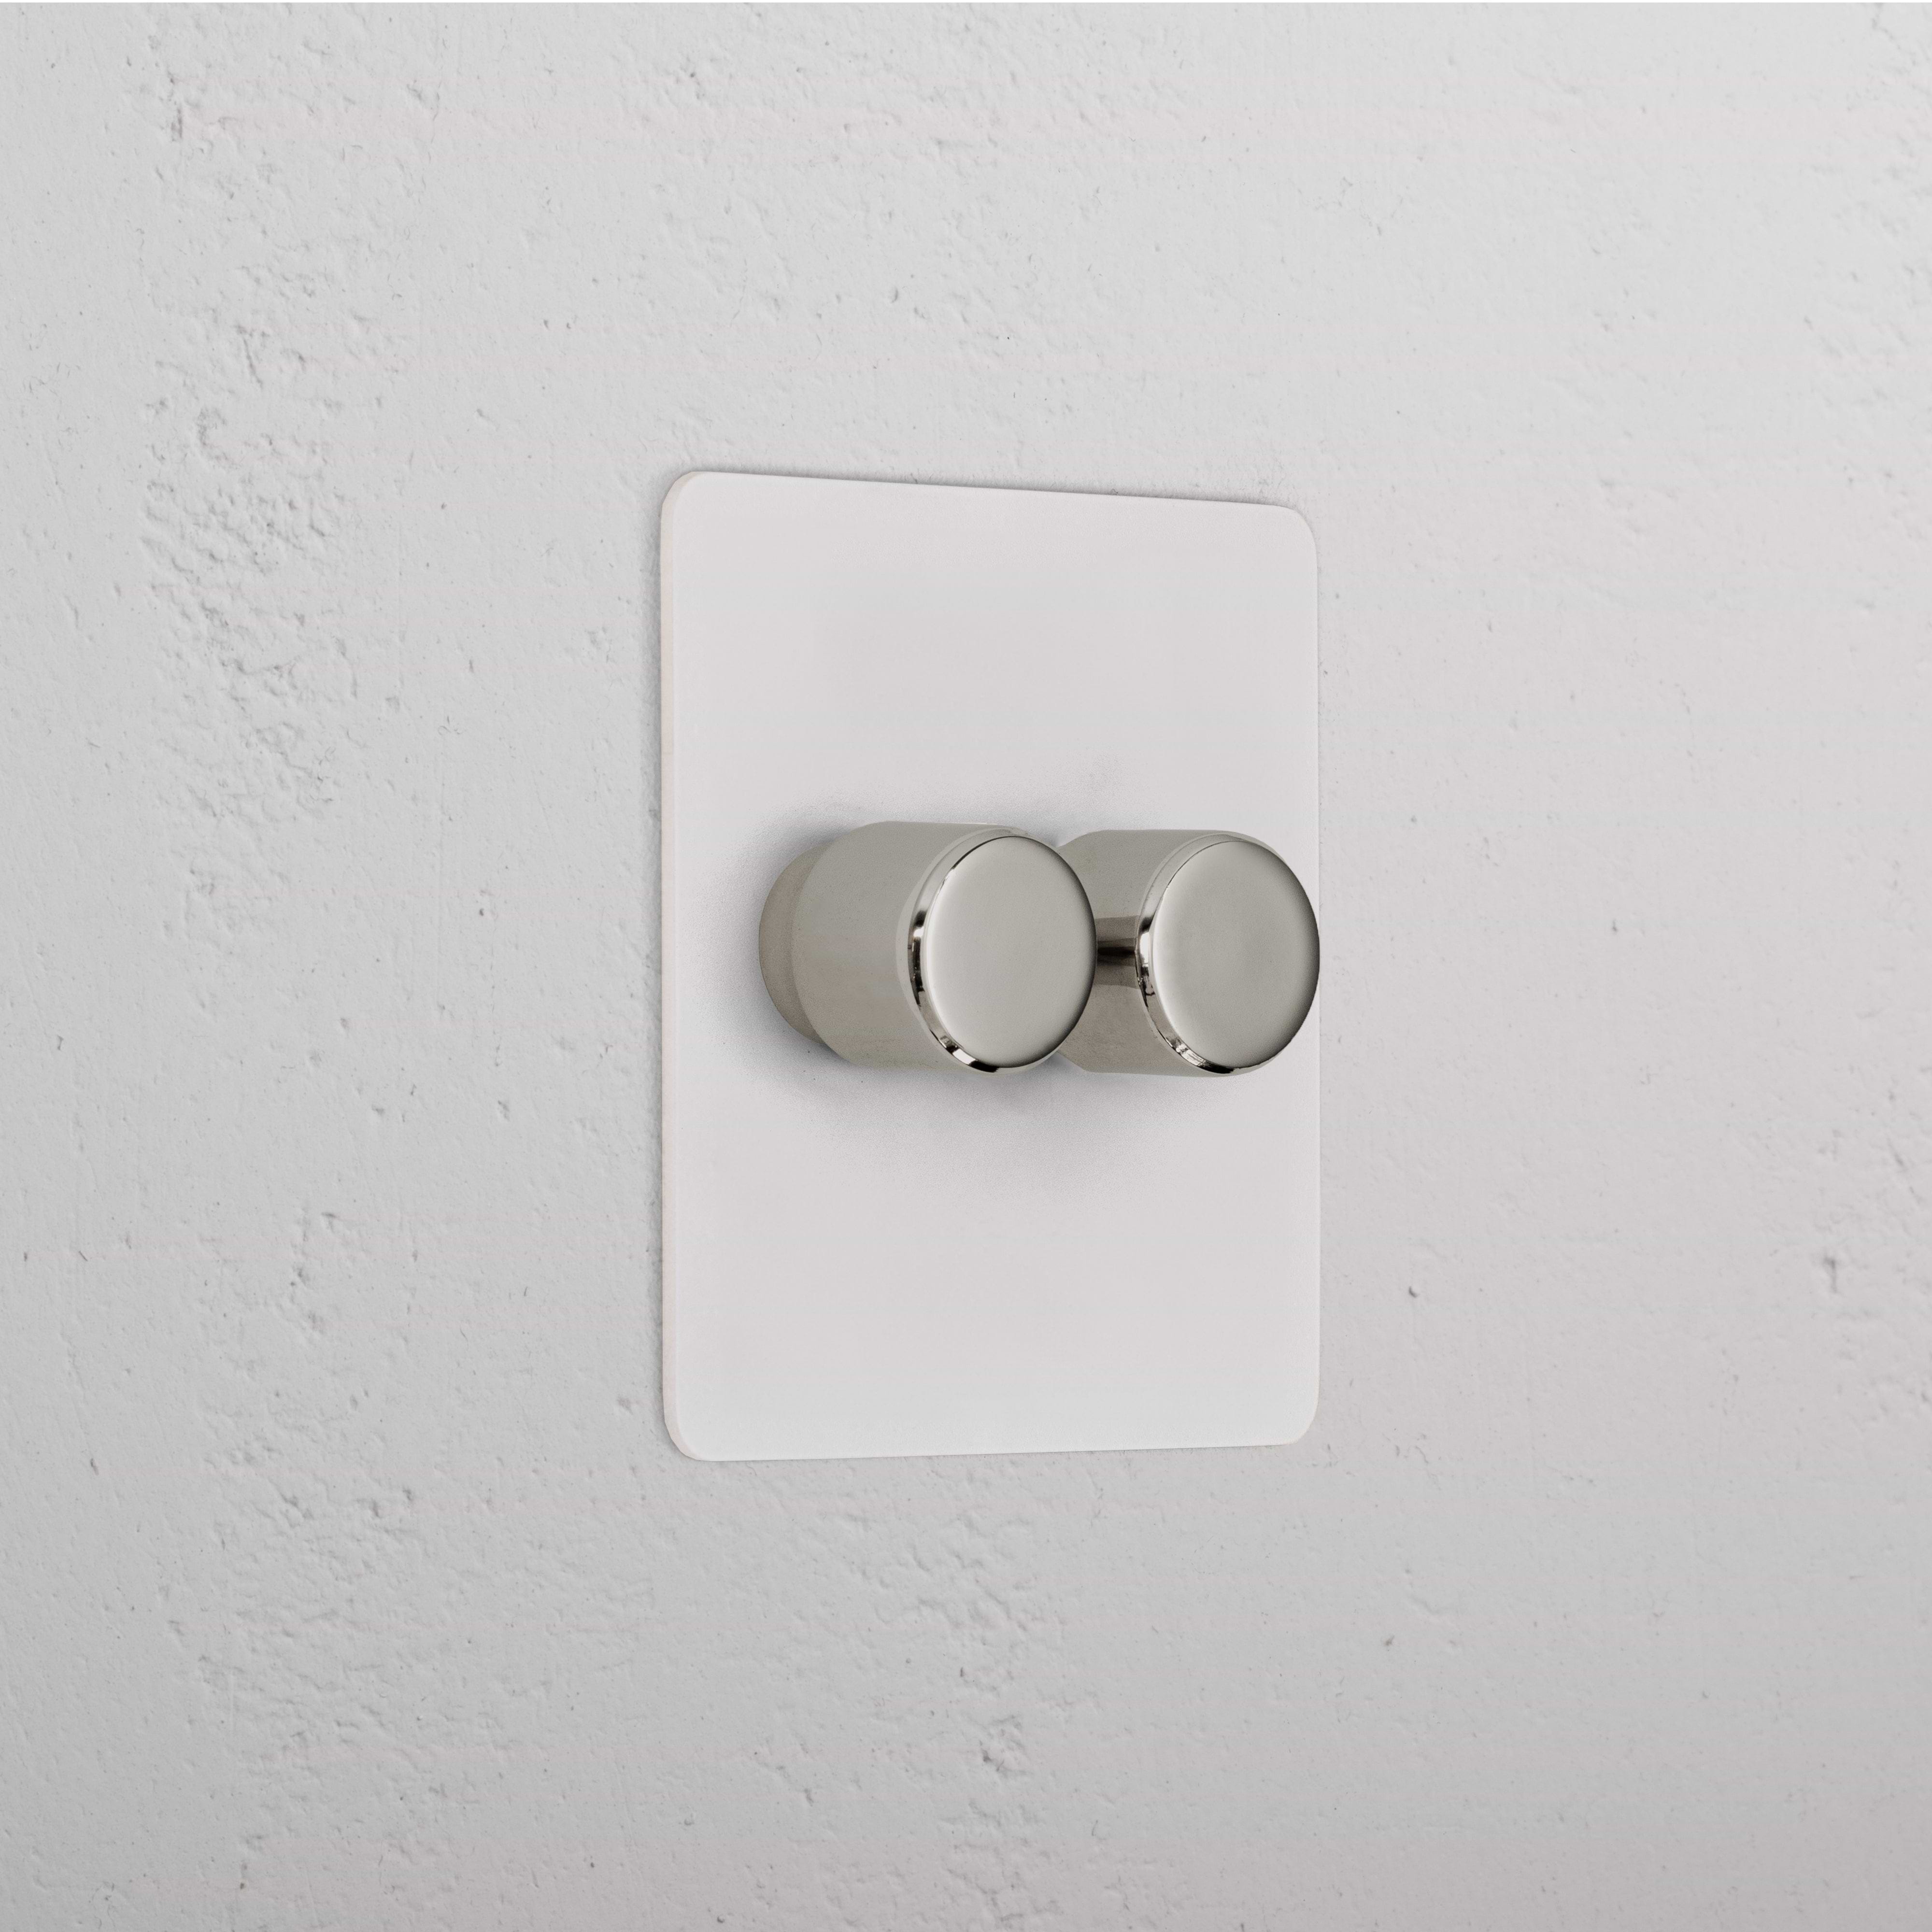 2G Dimmer Slimline Switch _ Paintable Polished Nickel